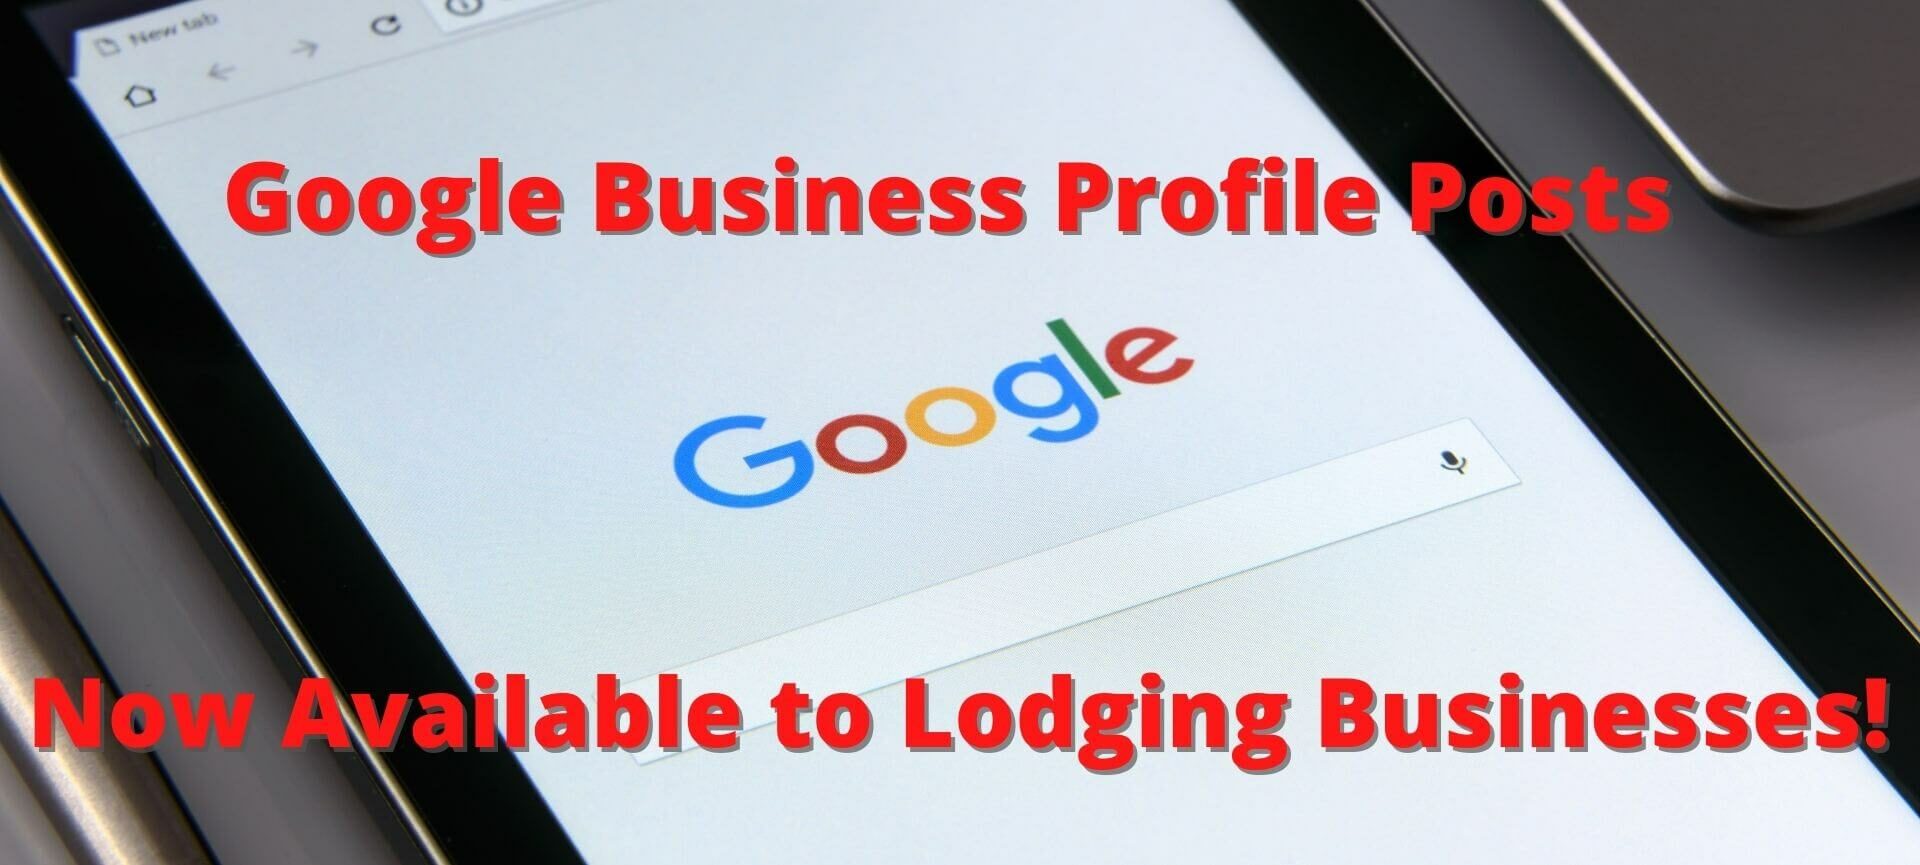 Google pulled up on a tablet with the words, "Google Business Profile Posts Now Available to Lodging Businesses!"